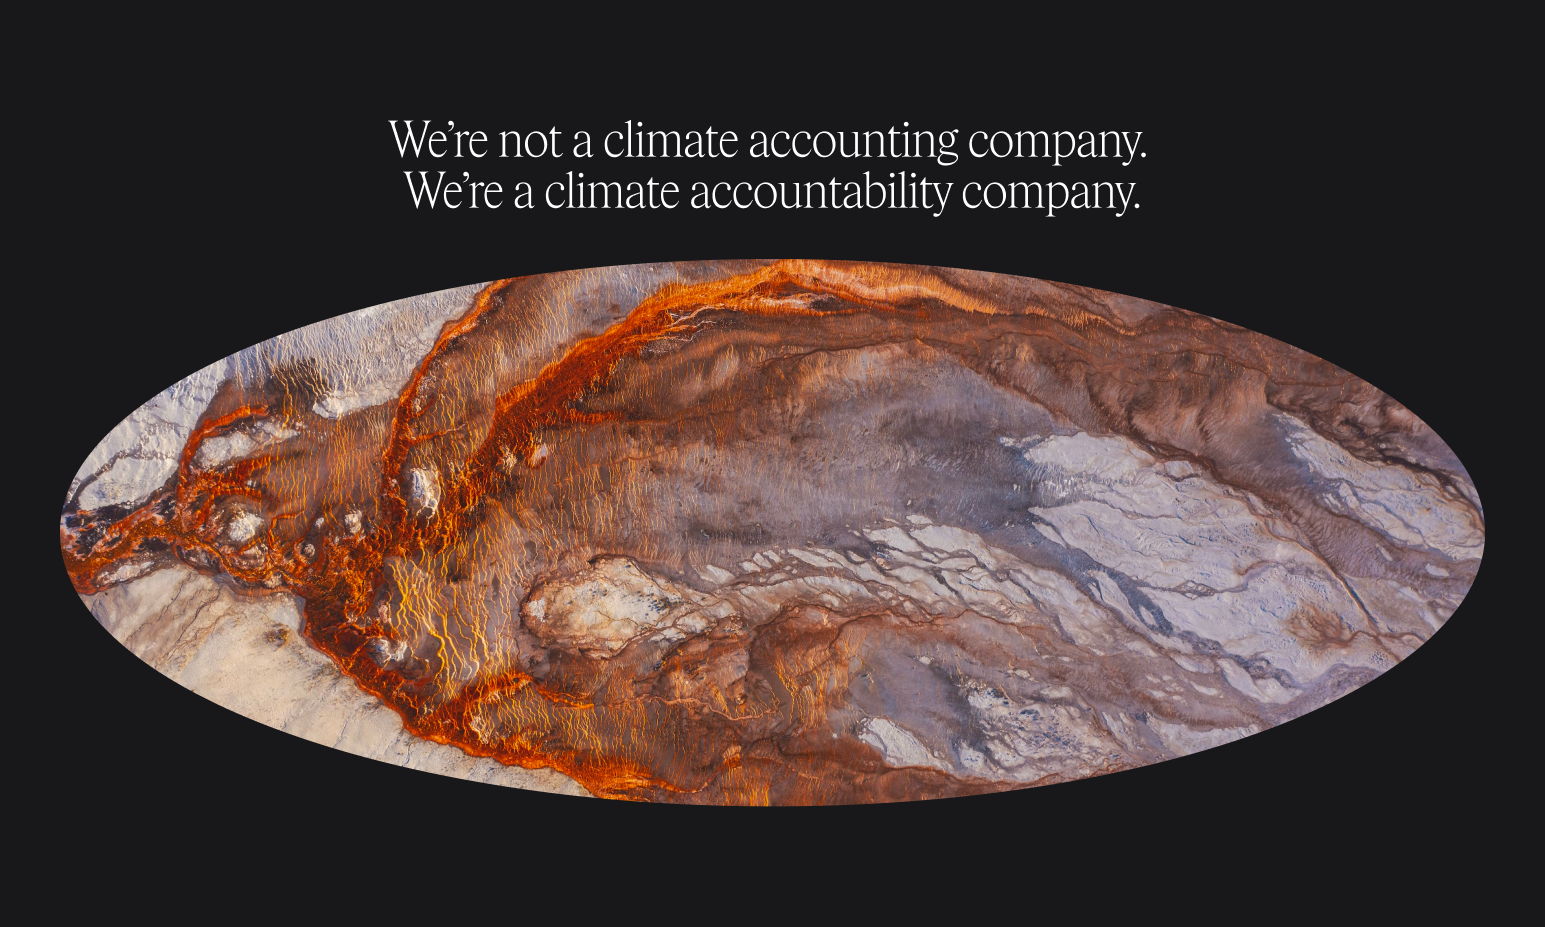 We're not a climate accounting company. We're a climate accountability company.